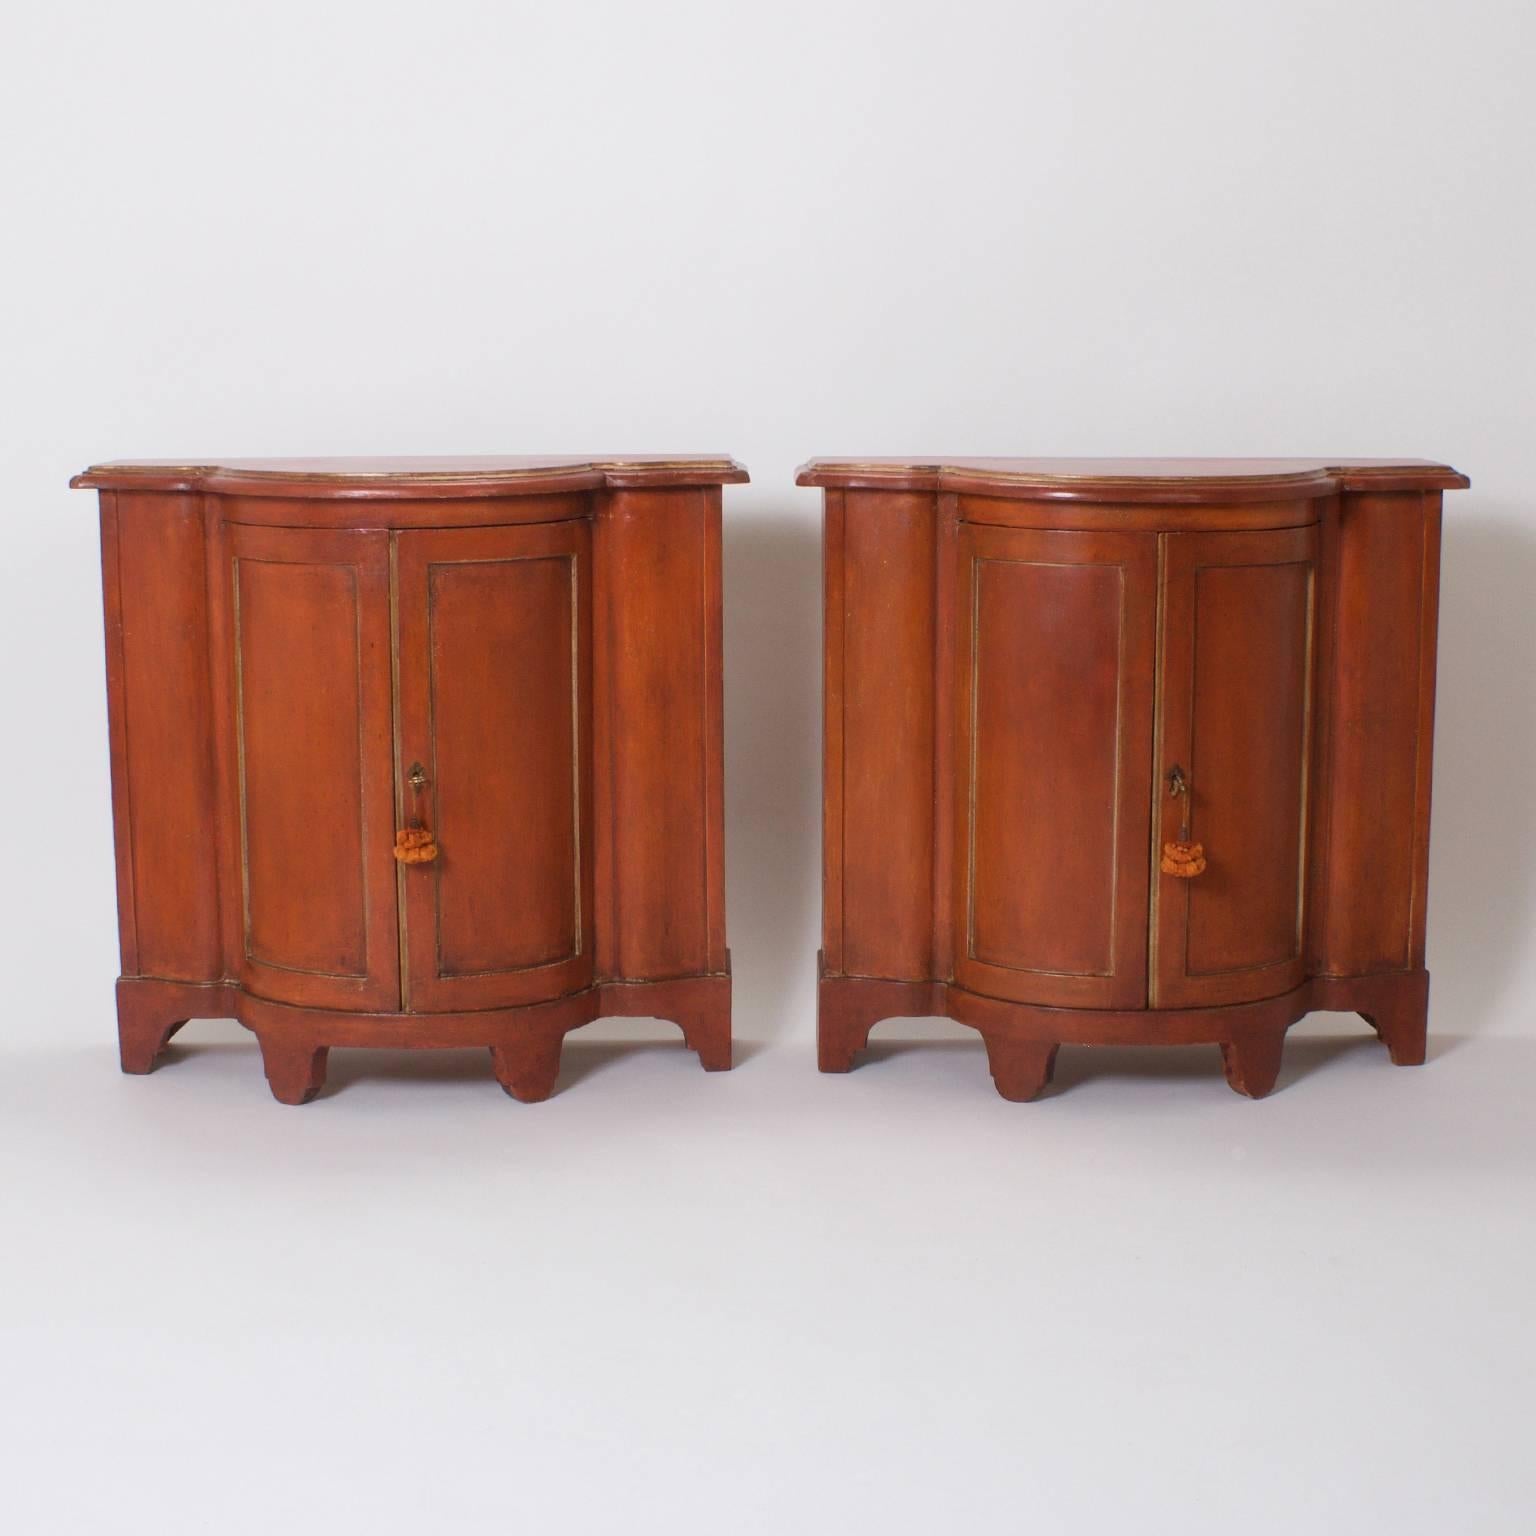 It would be easy to fall in love with this pair of Italian cabinets with their exaggerated serpentine form and uniquely continental rusty orange color. These servers are understated from top to bottom which highlights their perfect proportions. Both